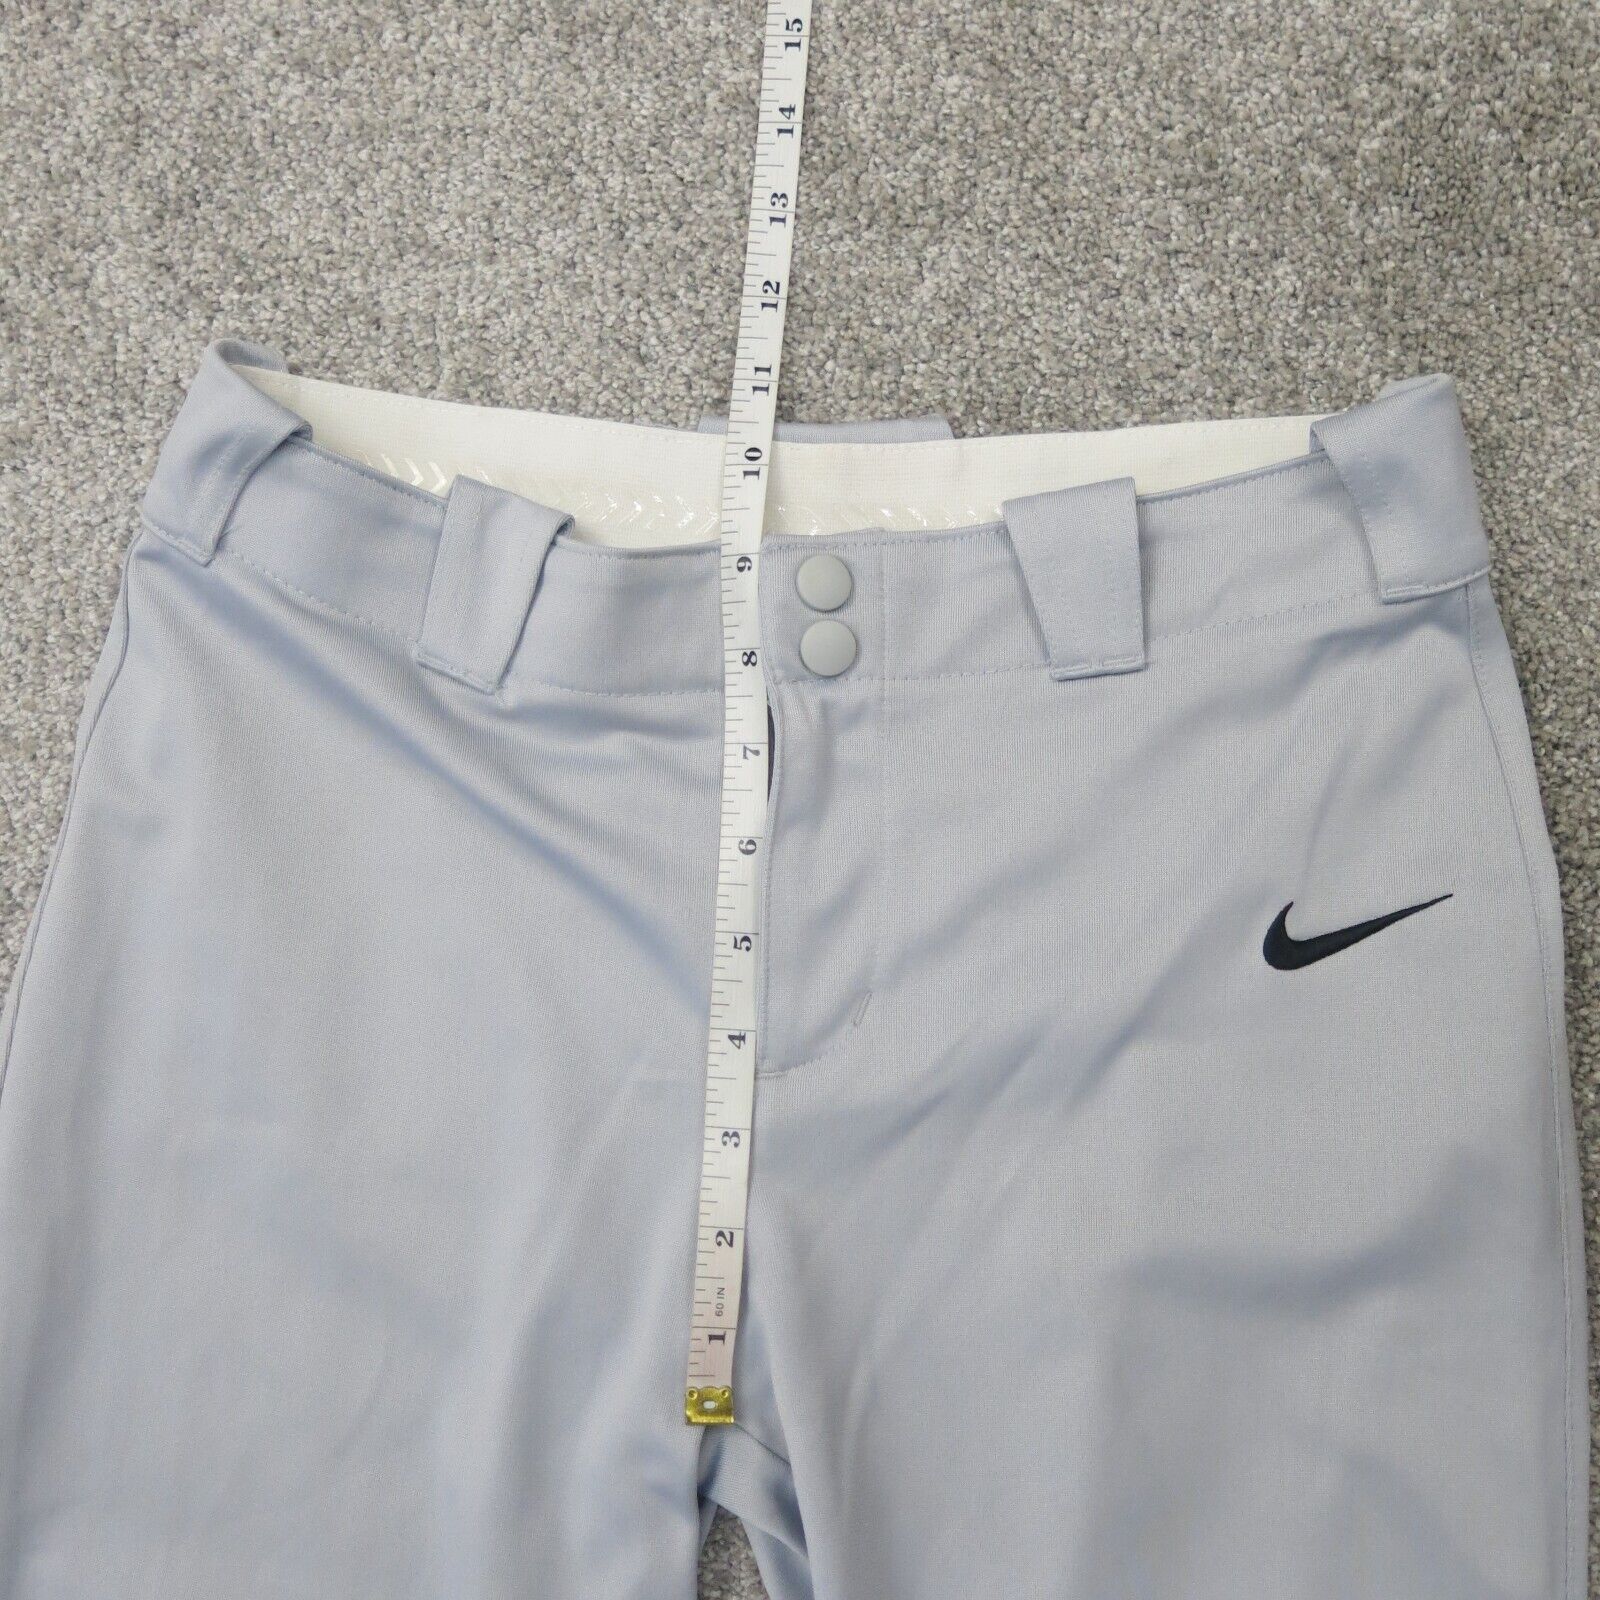 Nike Womens Dry Fit Sweatpants Athletic Training Gym Silver Size